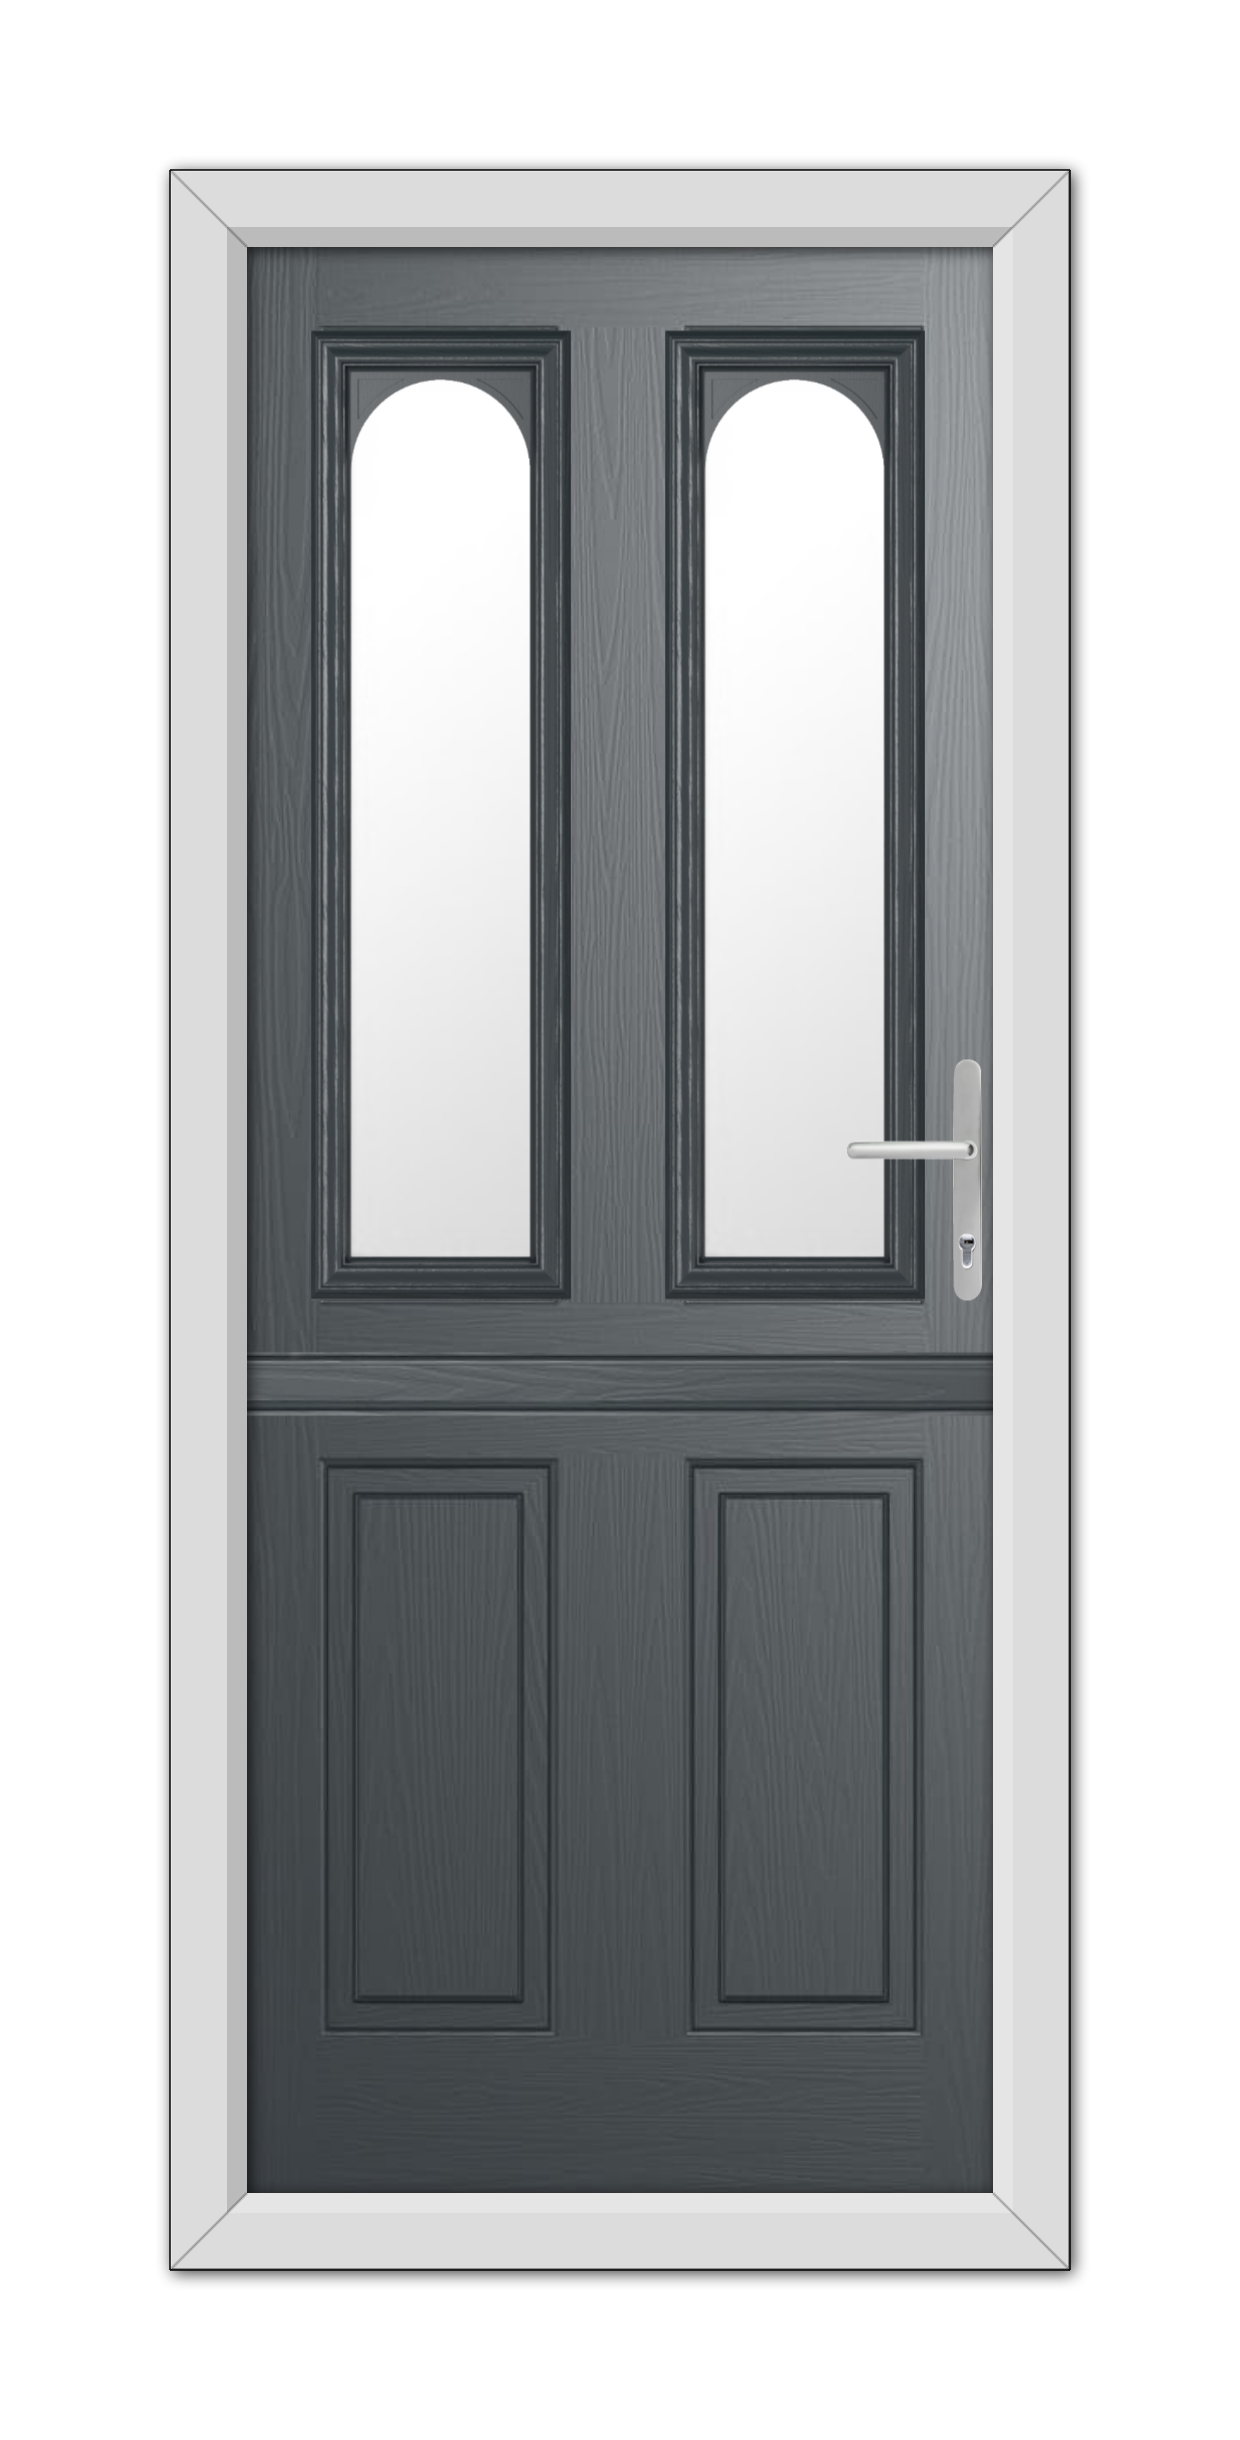 A modern Anthracite Grey Elmhurst Stable Composite Door 48mm Timber Core with upper half windows and a metallic handle, set in a white frame.